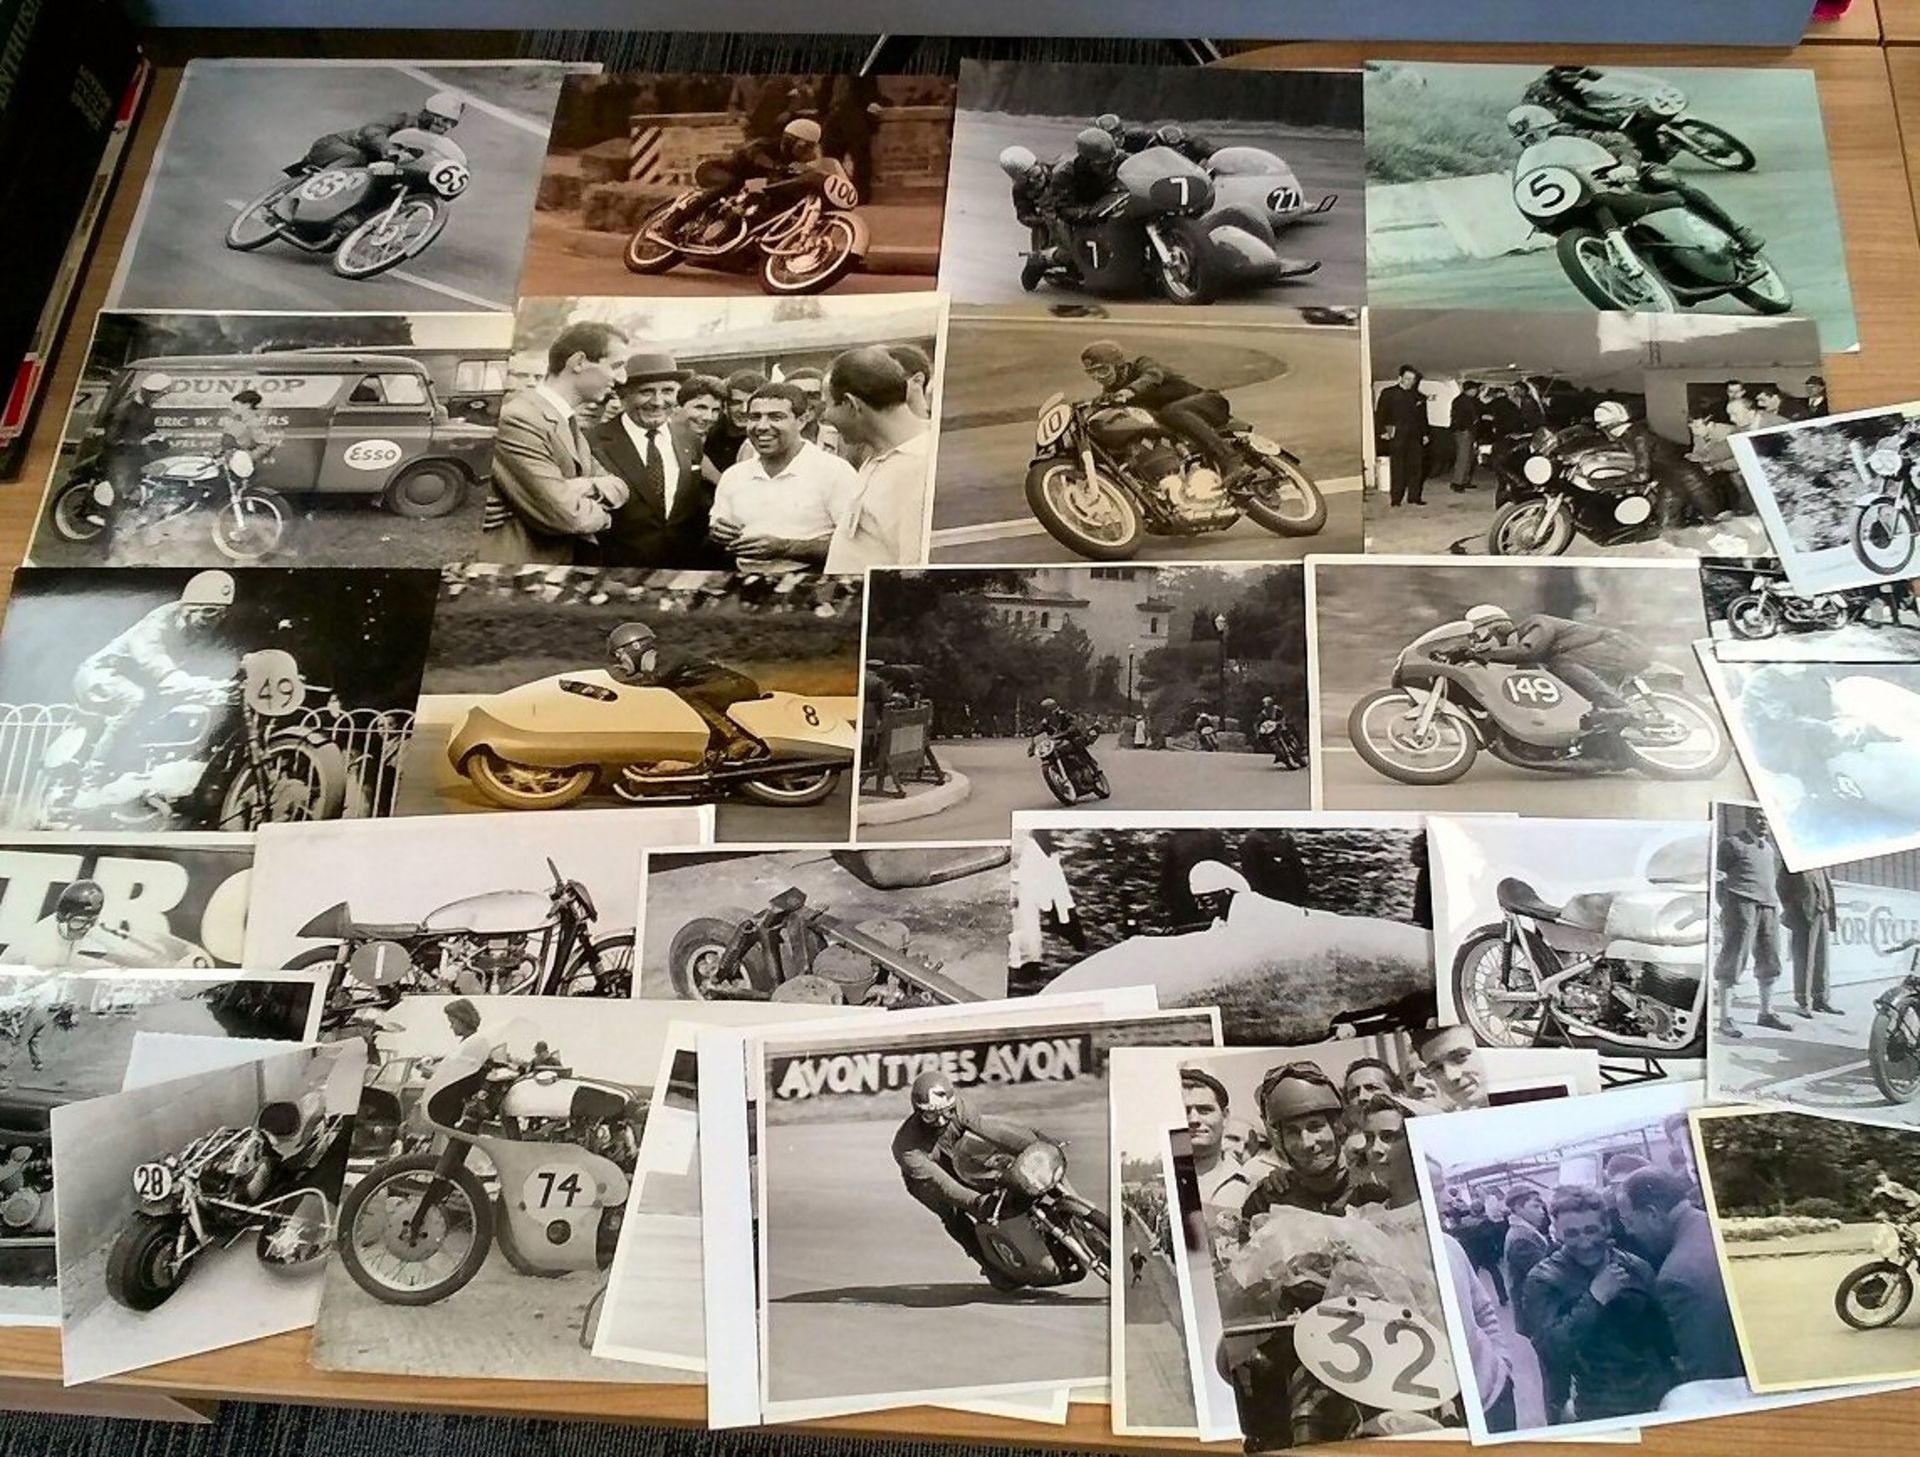 A good quantity of racing photographs of the open face helmet era, original and copy images, much